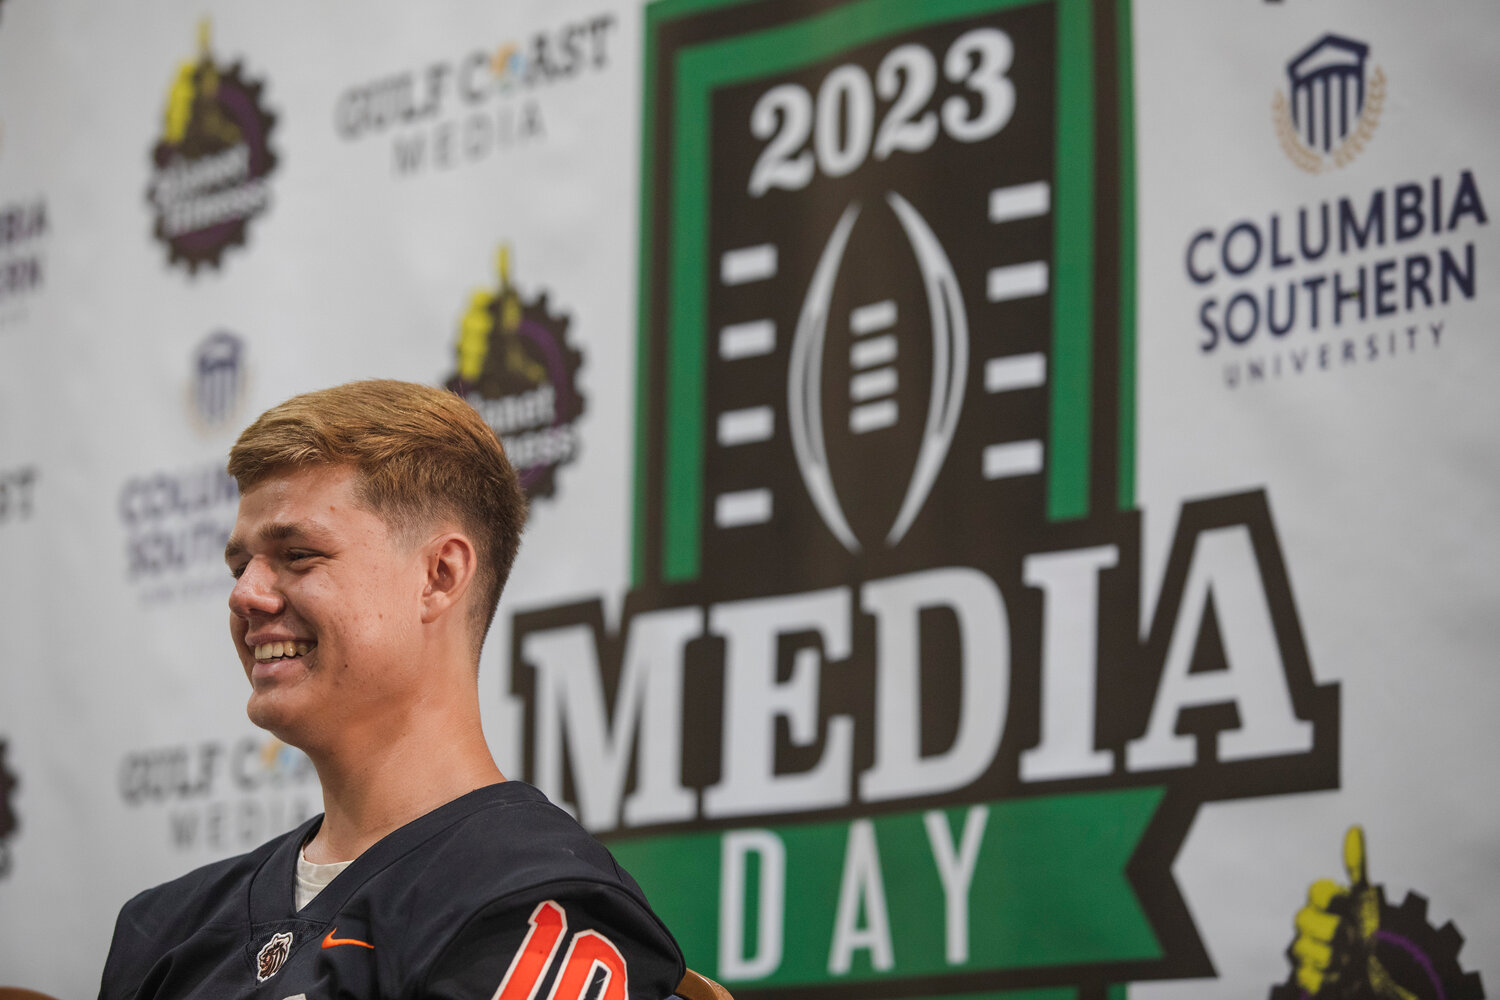 Quarterback Preston Kiper represented the Baldwin County Tigers on the Gulf Coast Media Day mainstage on July 27 where local teams previewed their upcoming seasons. Kiper said he and his teammates worked on their timing through the 7-on-7 offseason.